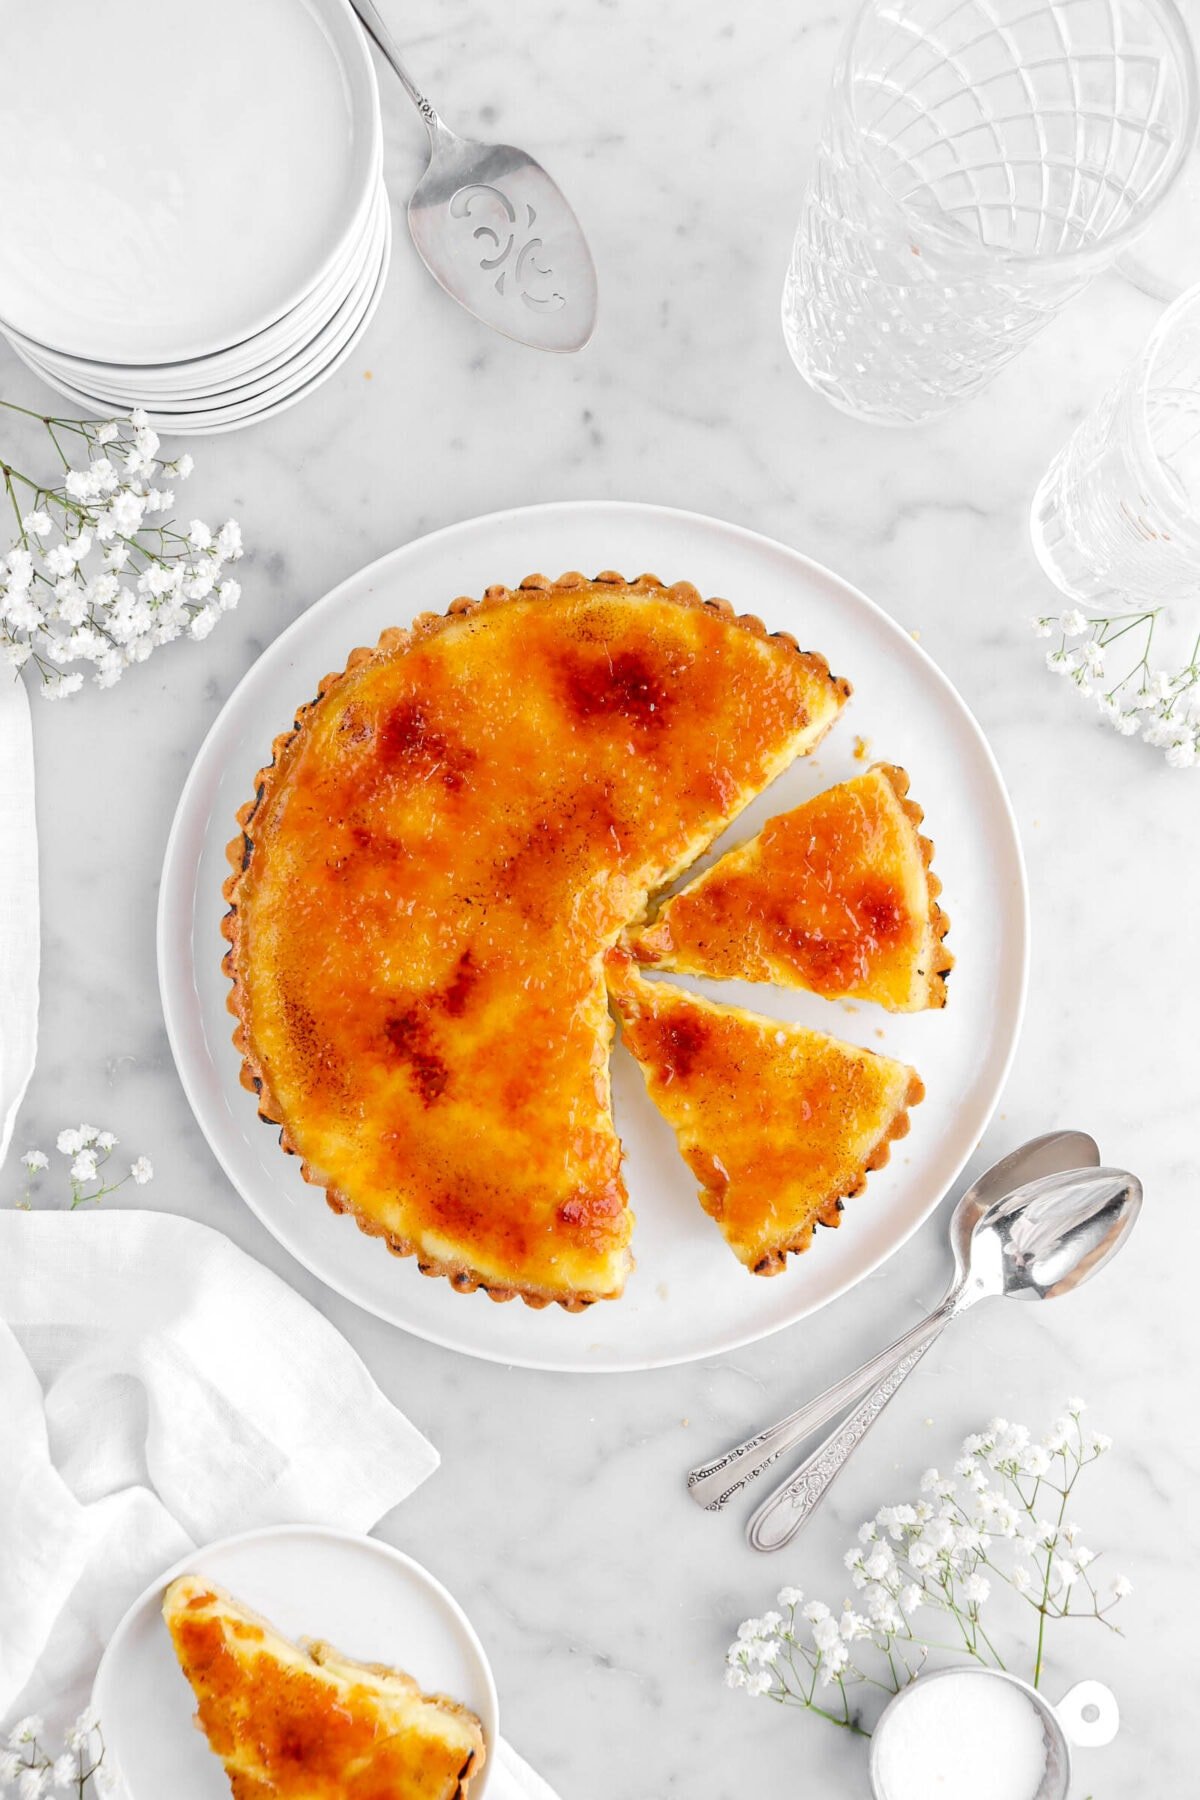 overhead shot of tart with two slices cut into it on white plate with another slice beside on smaller white plate with flowers around.